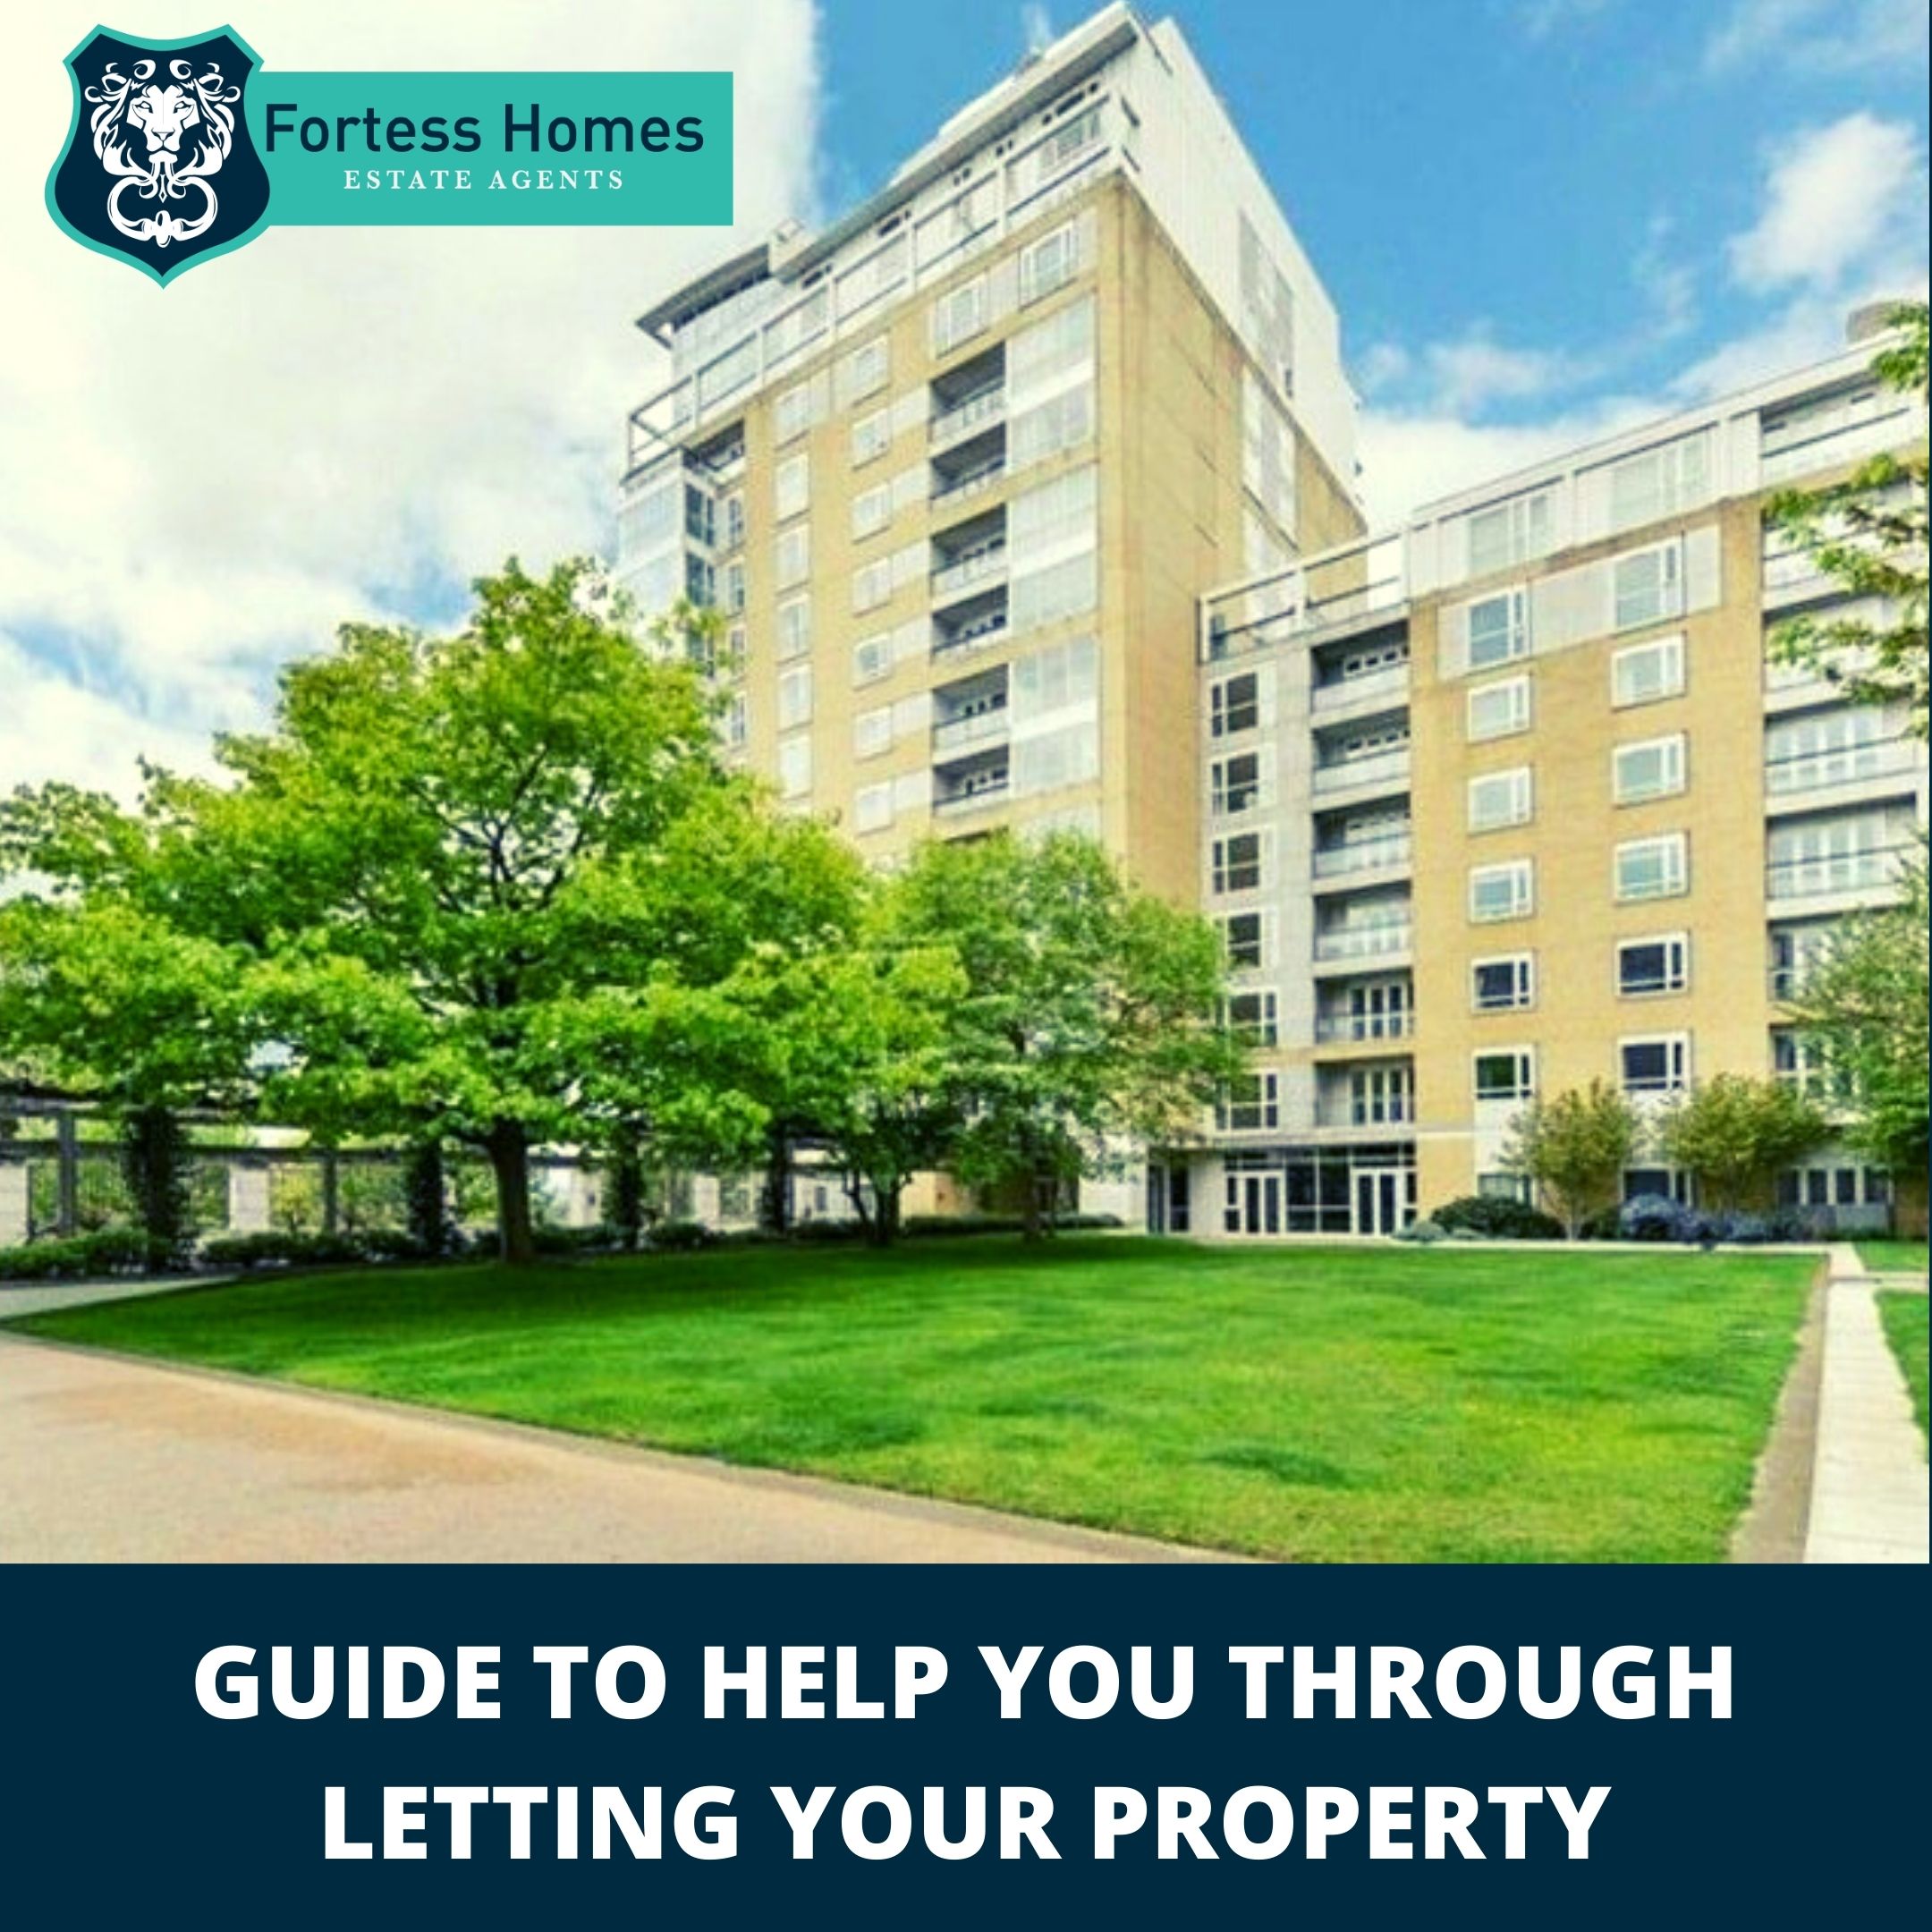 GUIDE TO HELP YOU THROUGH LETTING YOUR PROPERTY